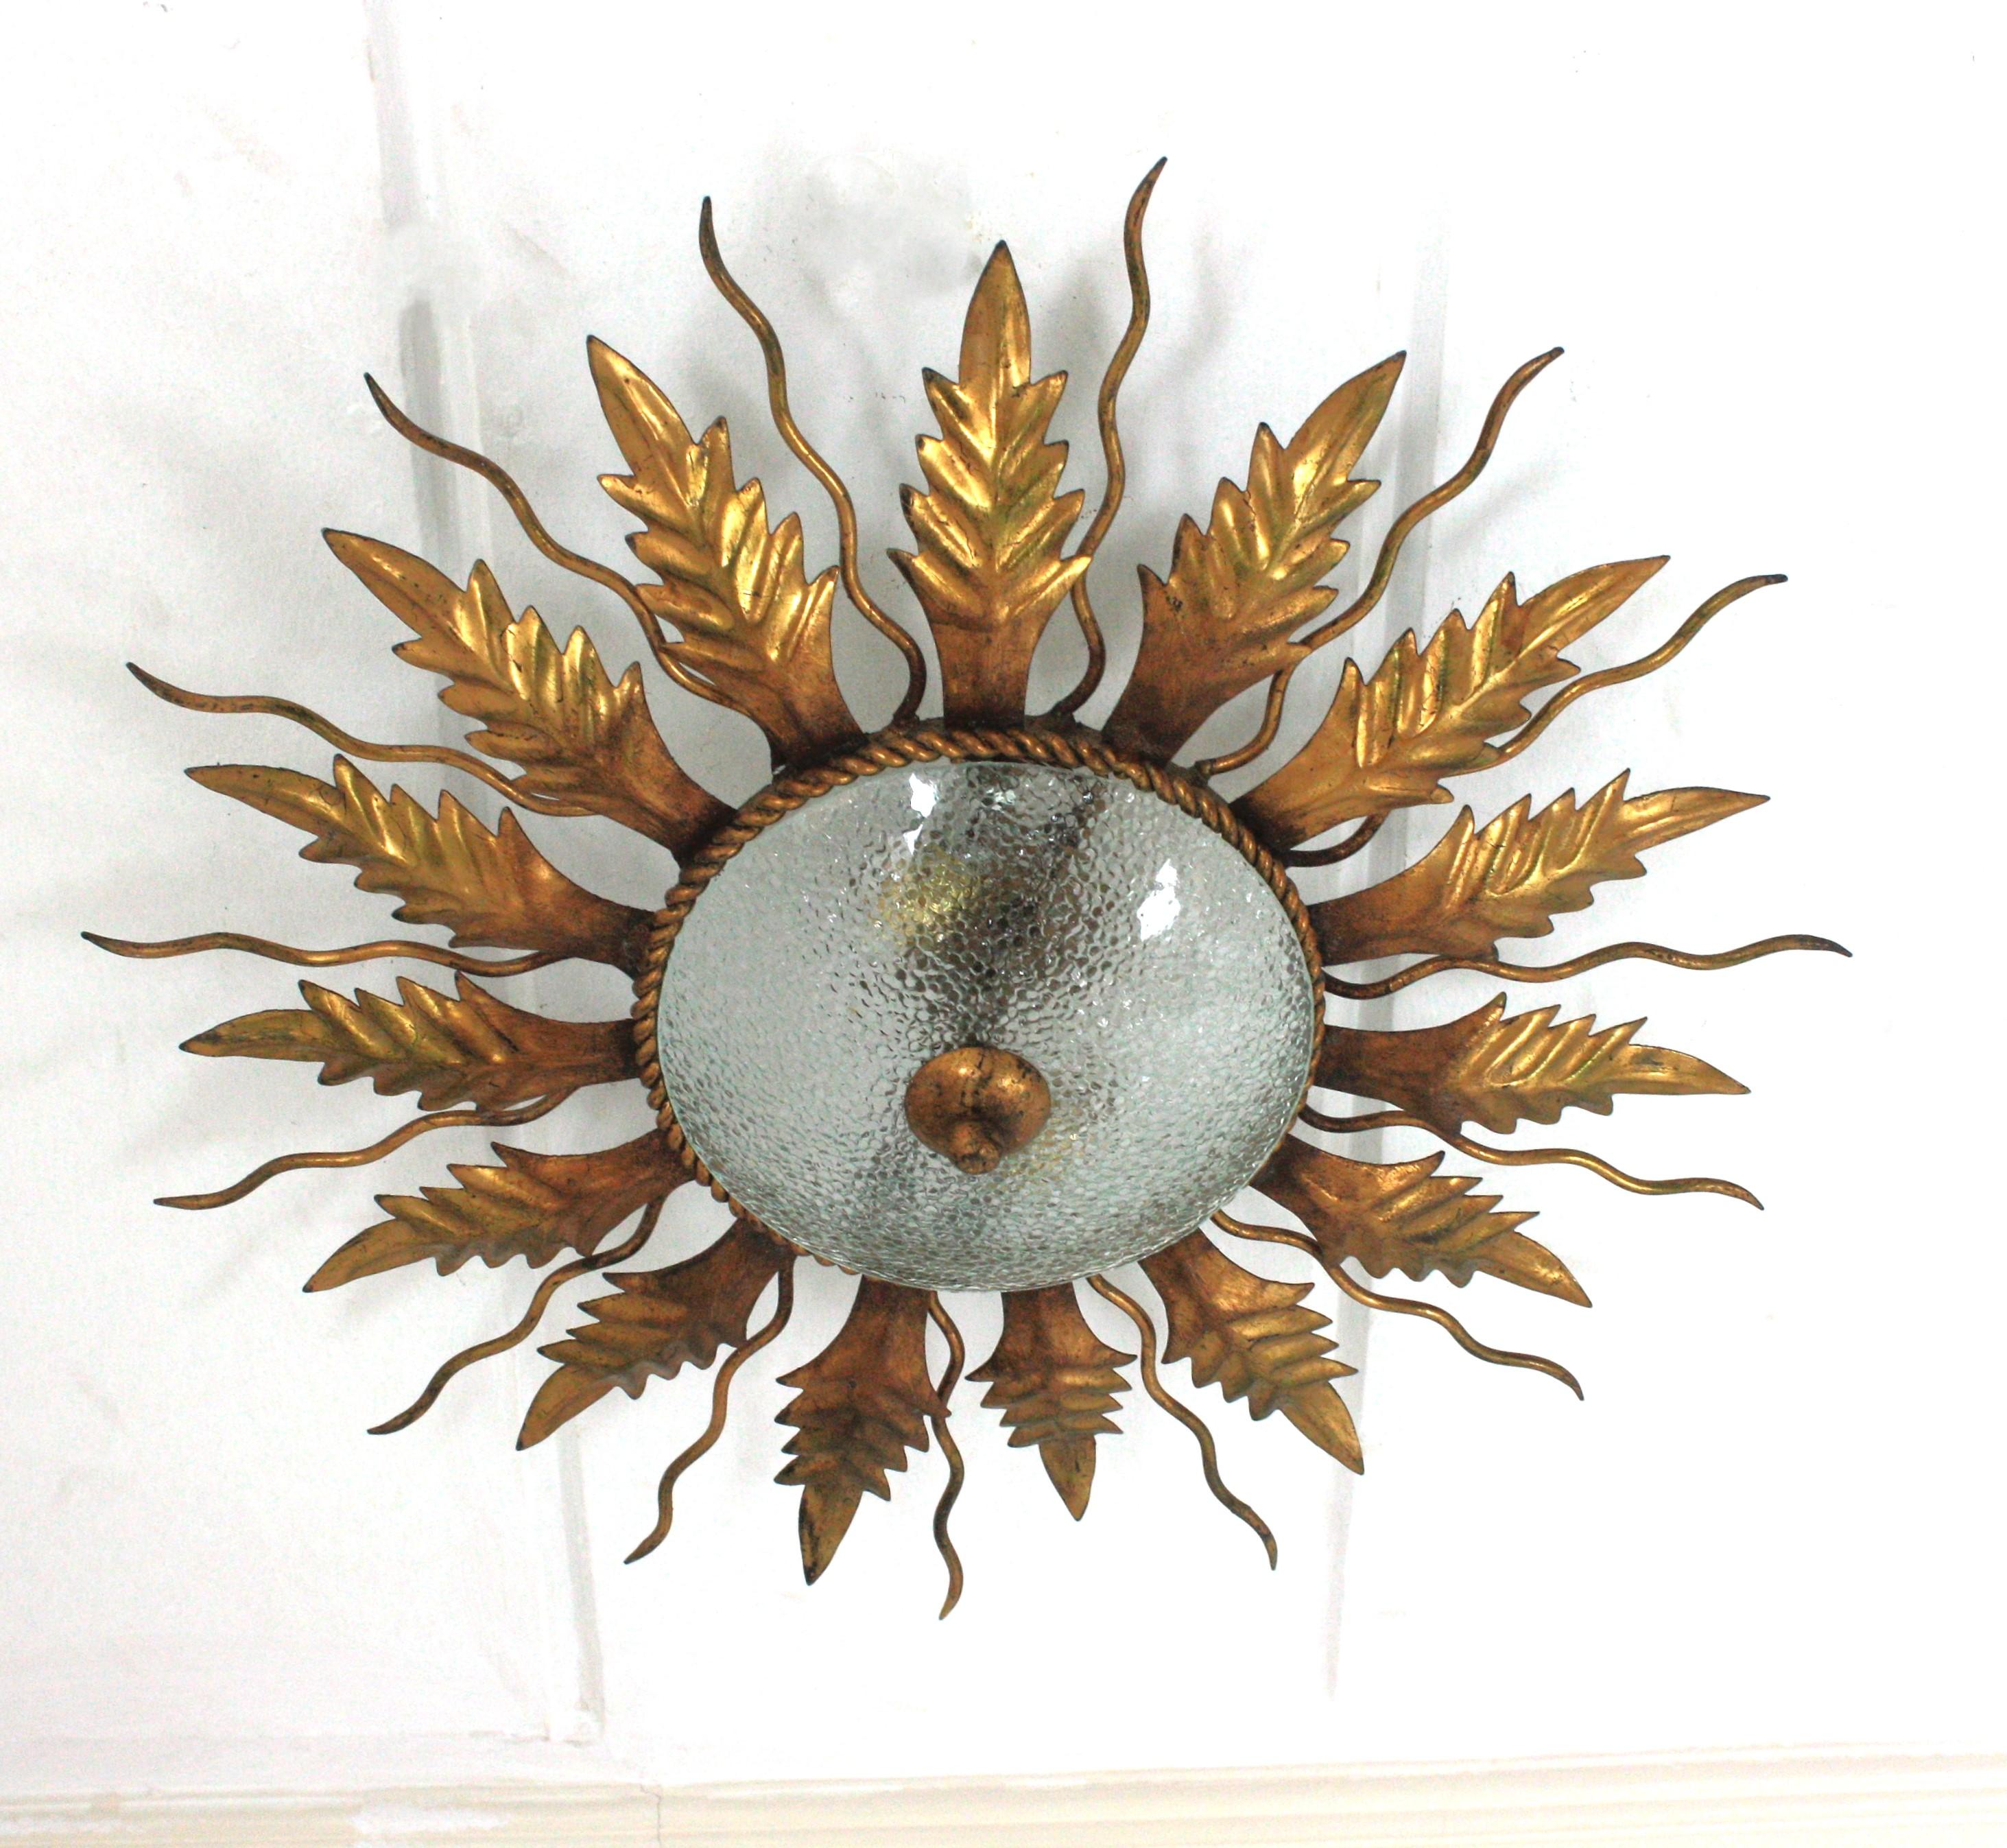 Gold leaf Gilt sunburst light fixture in wrought iron and cracked glass. Spain, 1950s.
This eye-catching ceiling flush mount is made in hand-forged iron and finished in gold leaf gilding.
It has curly iron rays alternating with iron leaves